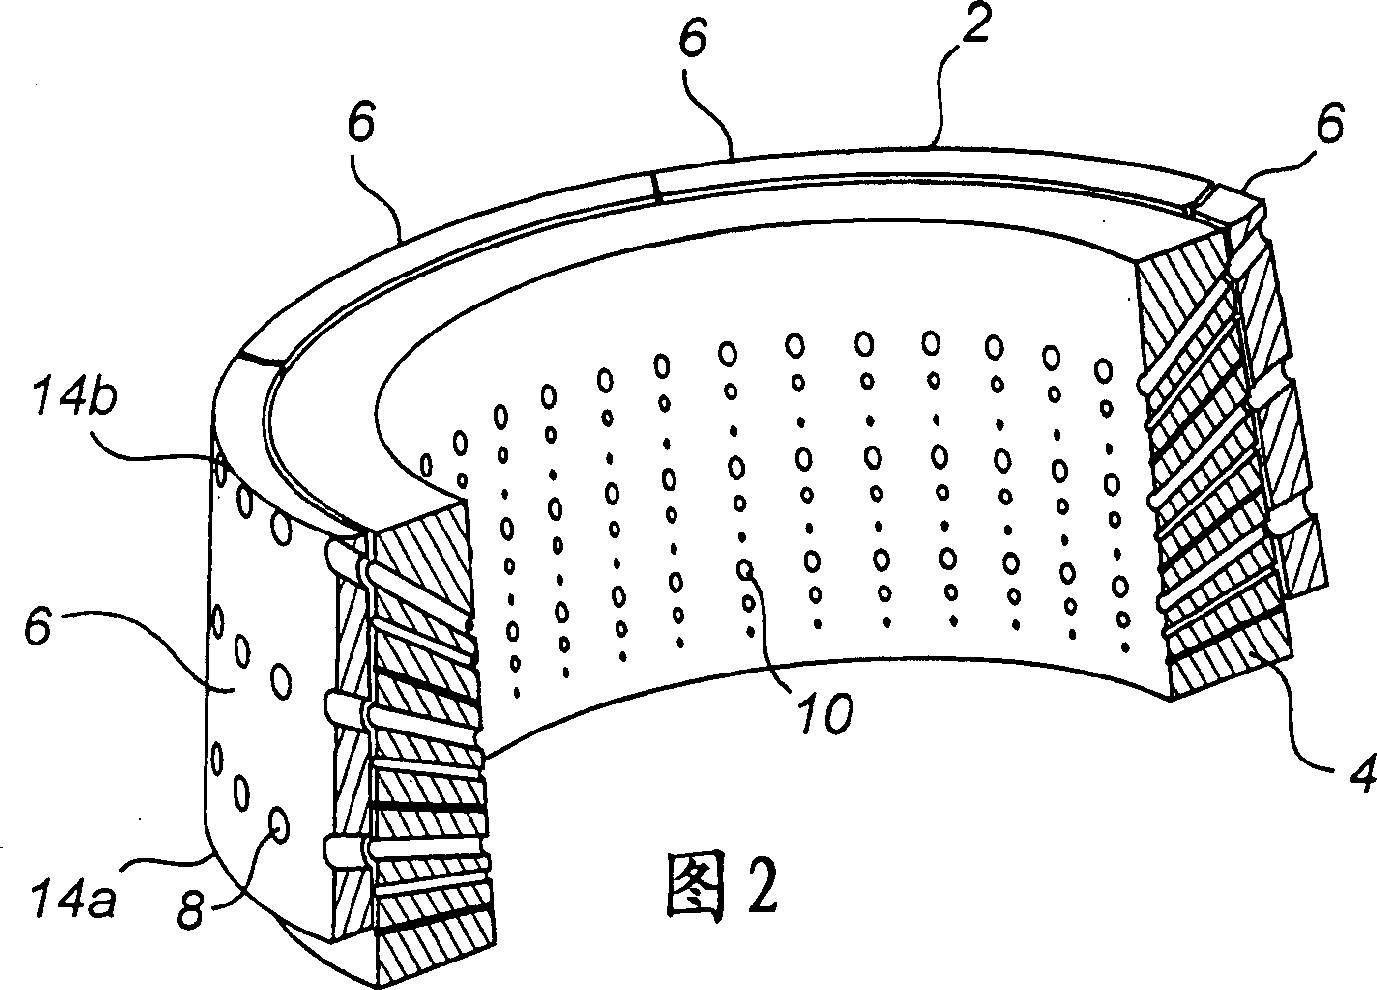 Apparatus and method for focusing a radiotherapy field, where slidable plates on the collimator ring controls the collimator